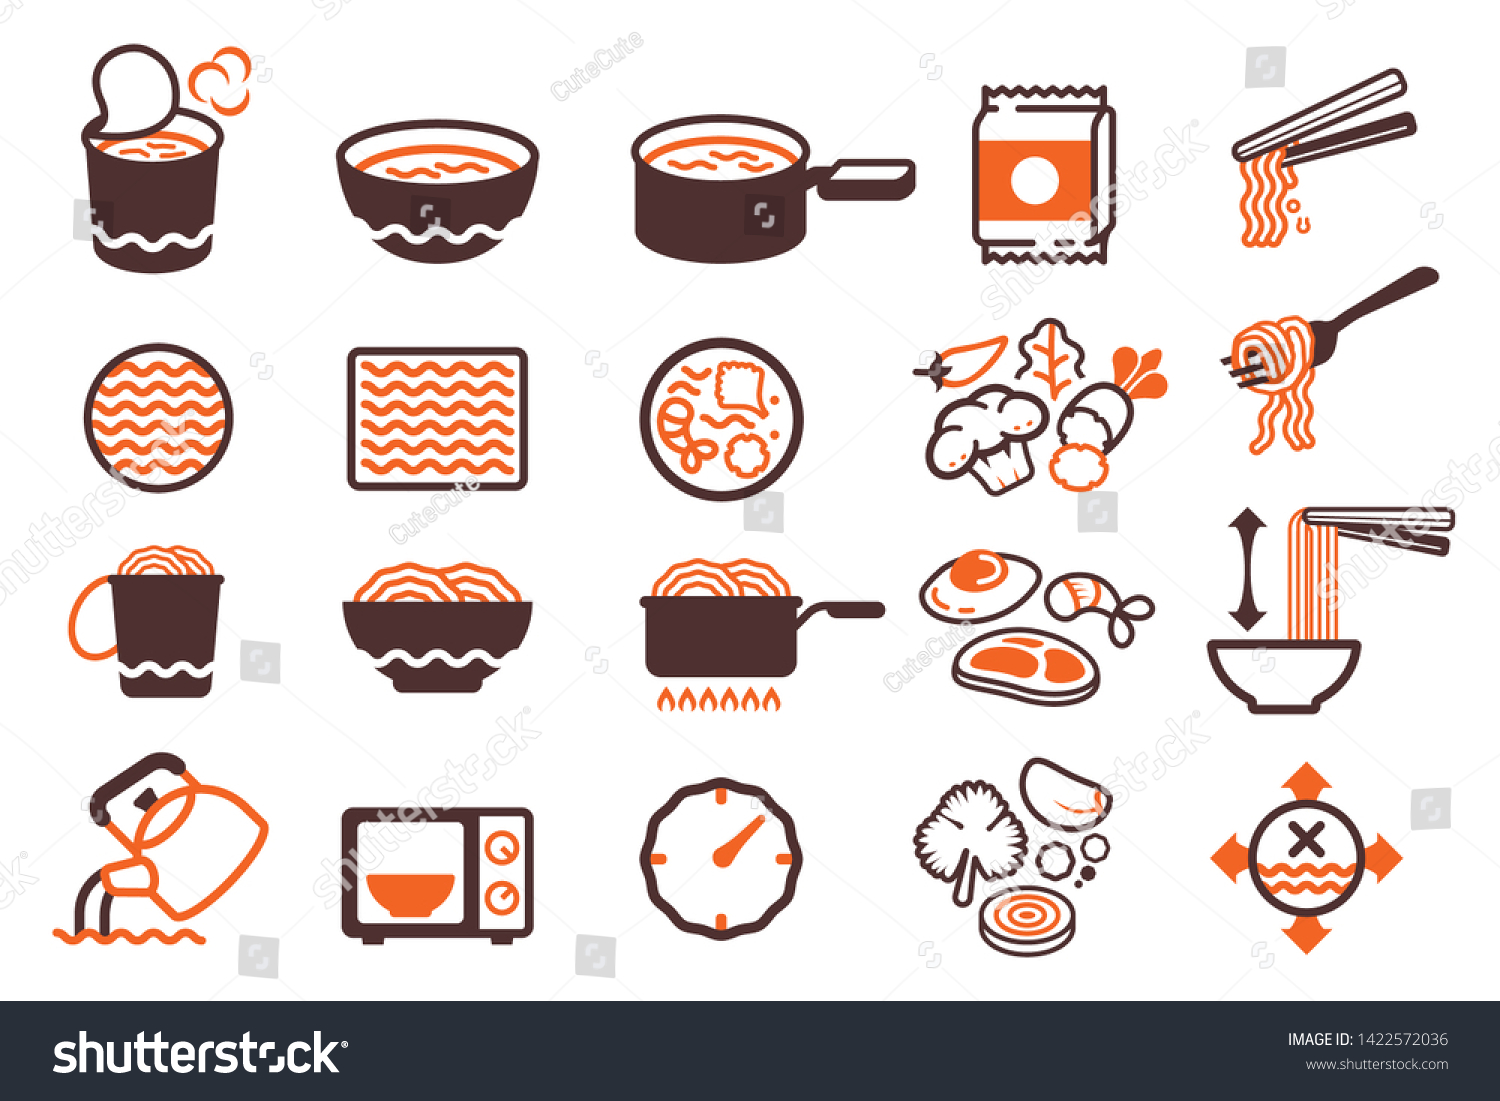 Cooking Easy Food Instant Noodle Product Stock Vector (Royalty Free ...